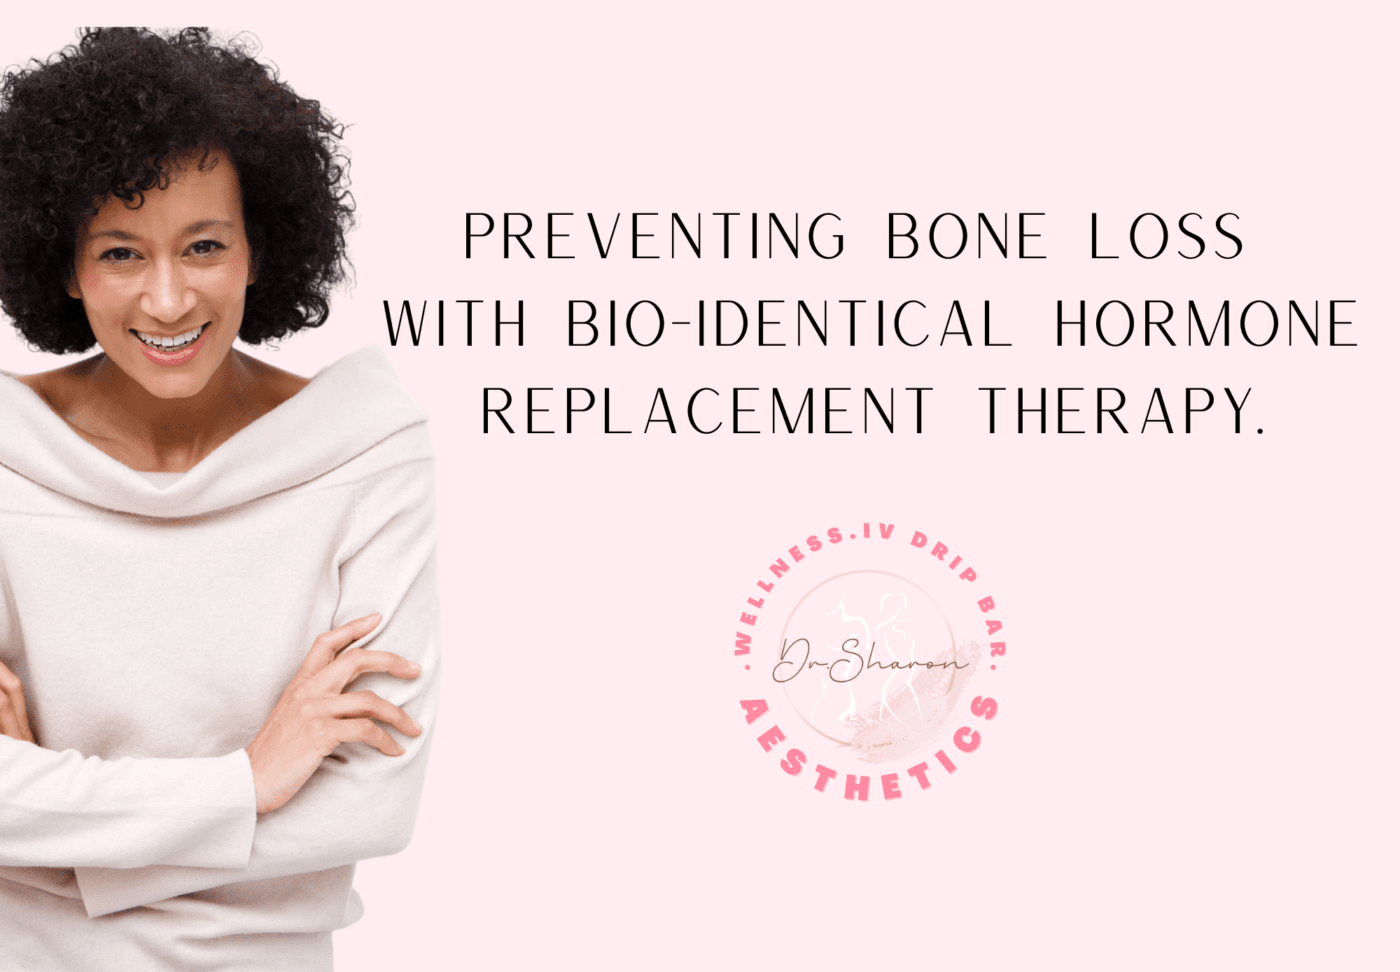 Preventing bone loss with bio-identical hormone replacement therapy